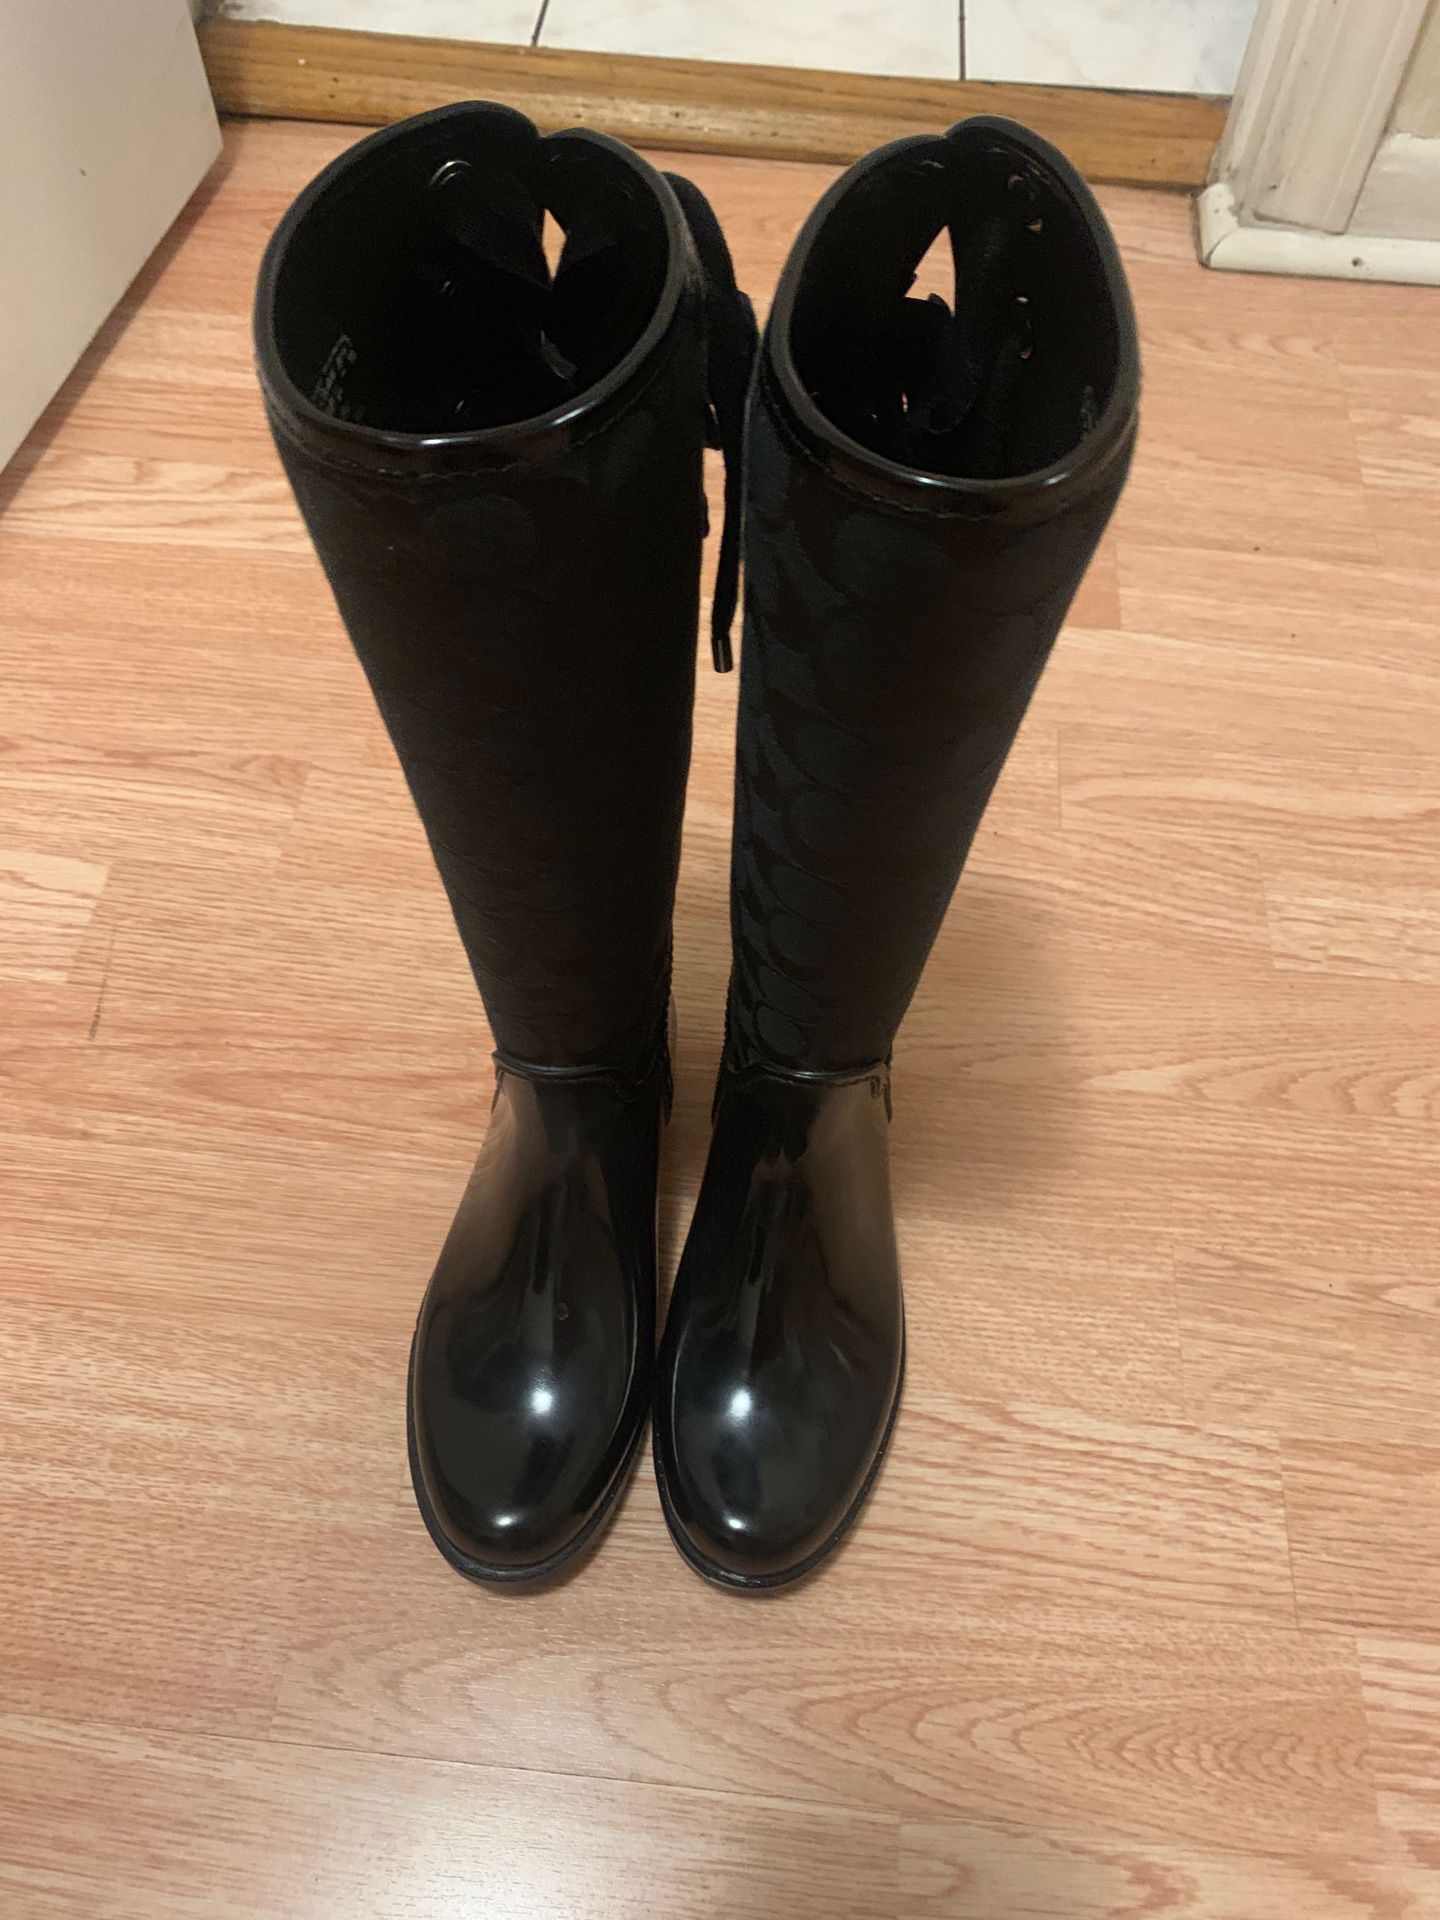 🤩COACH RAÍN BOOTS 🤩 size 5 original only worn two times practically new!!!